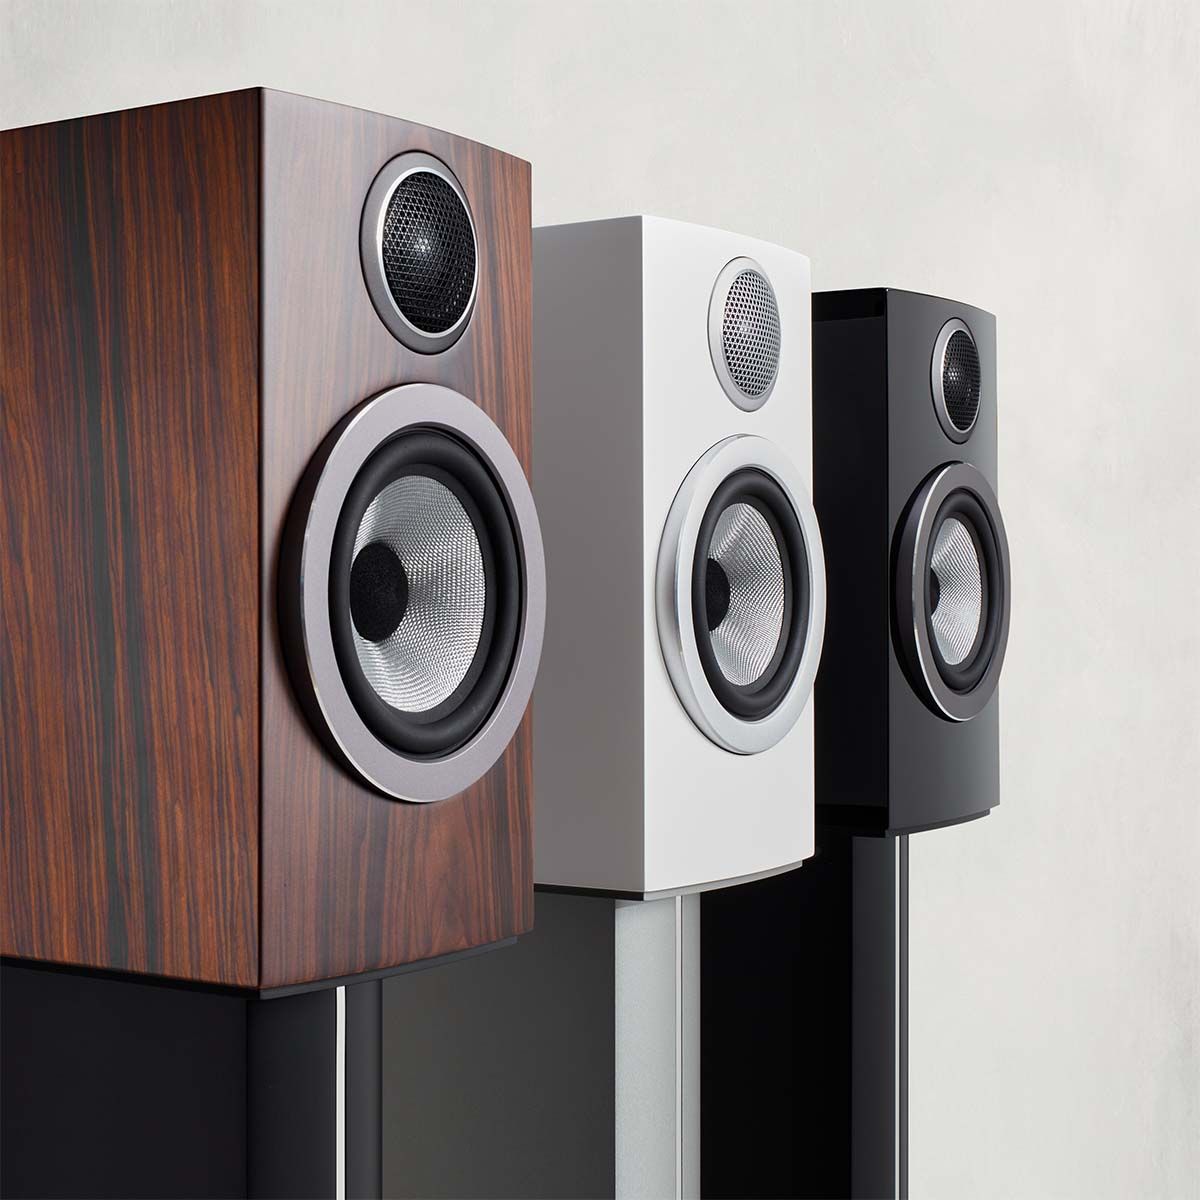 Bowers & Wilkins 707 S3 shown in three finishes - mocha, white, black